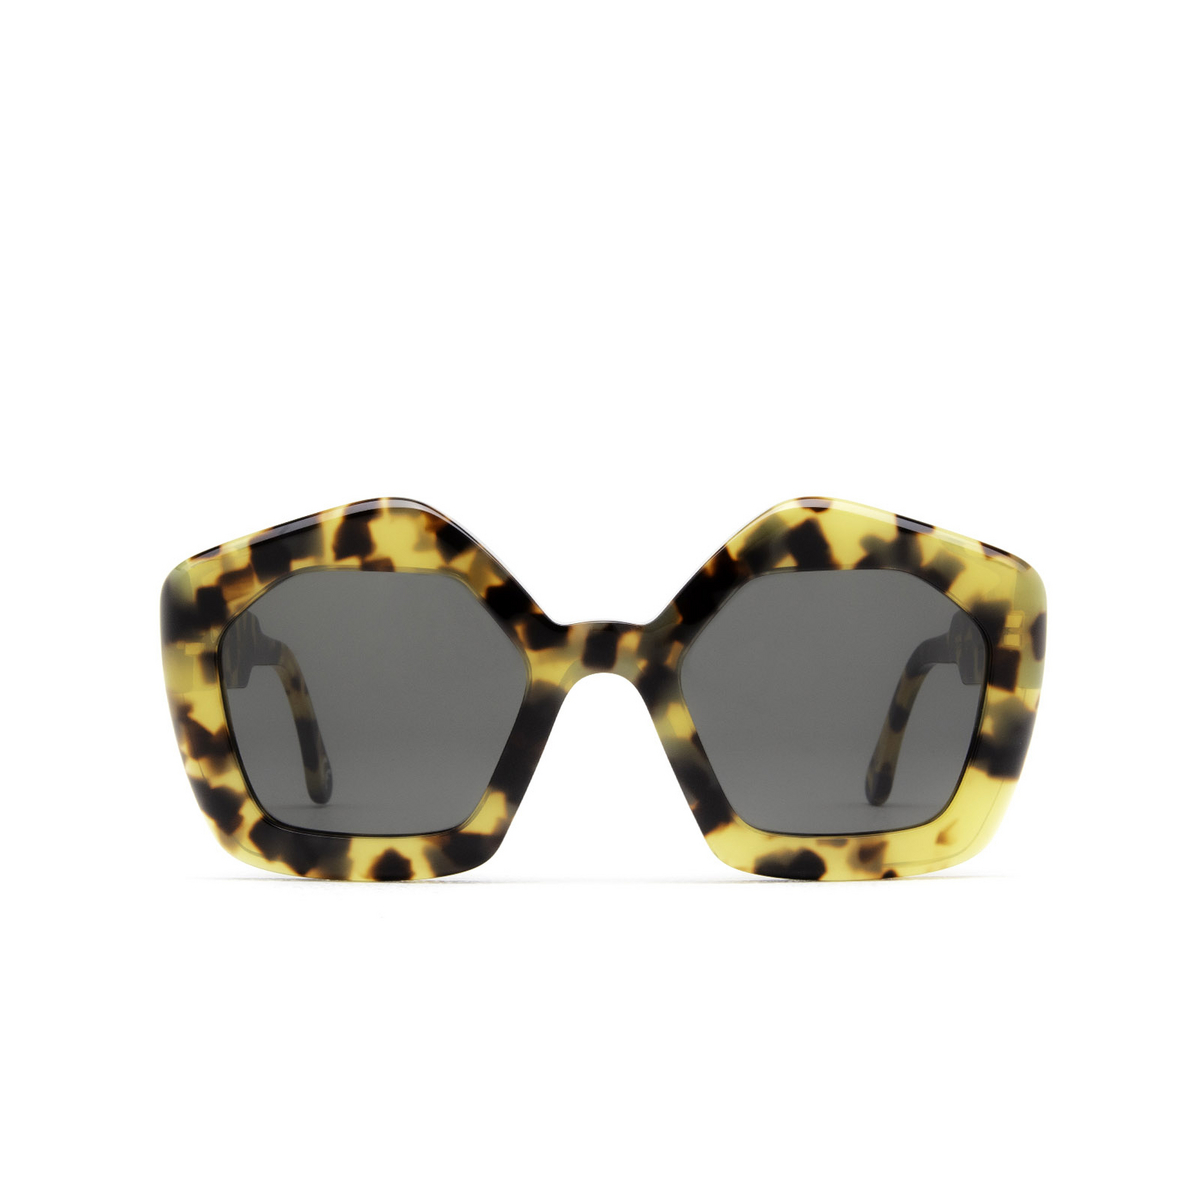 Marni® Irregular Sunglasses: Laughing Waters color Sol Leone E95 - front view.